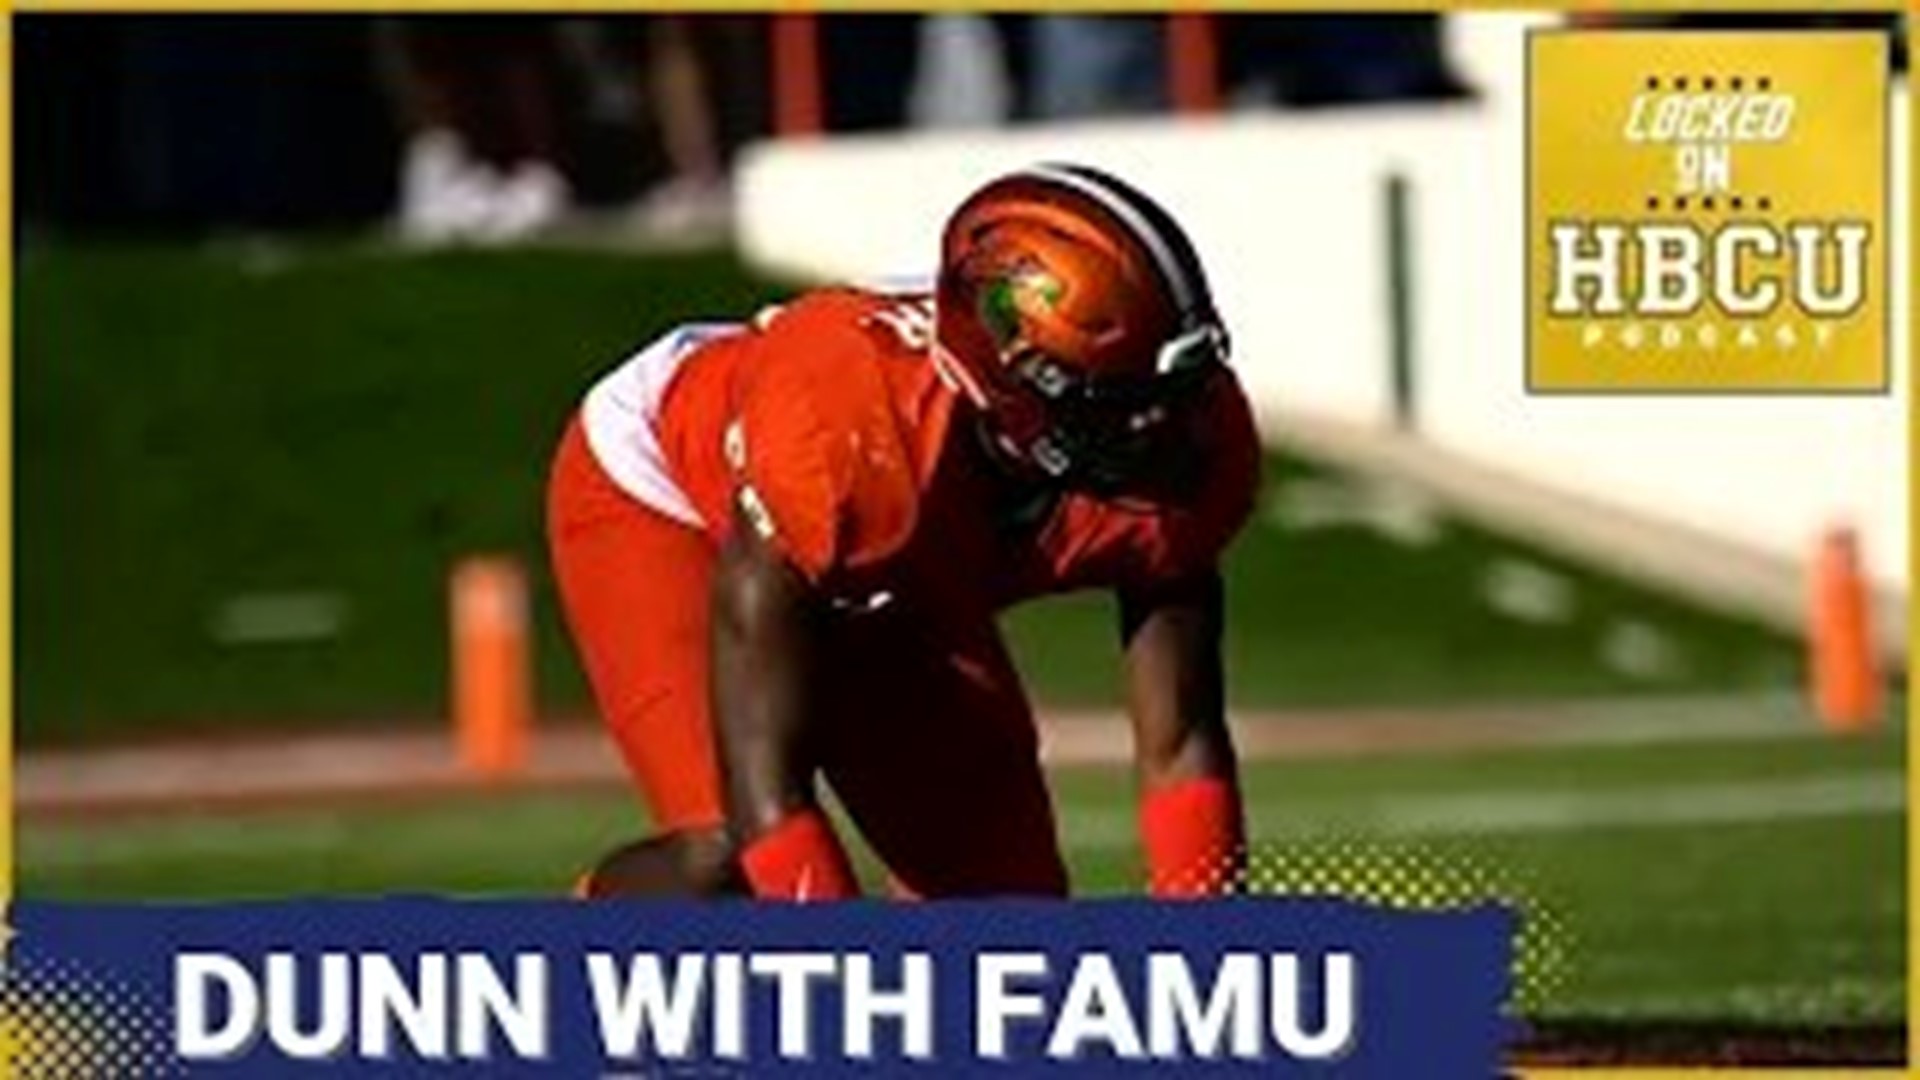 FAMU edge rusher Anthony Dunn has a prototypical build that makes his future in the transfer portal interesting. FAMU spring game could answer a big question.